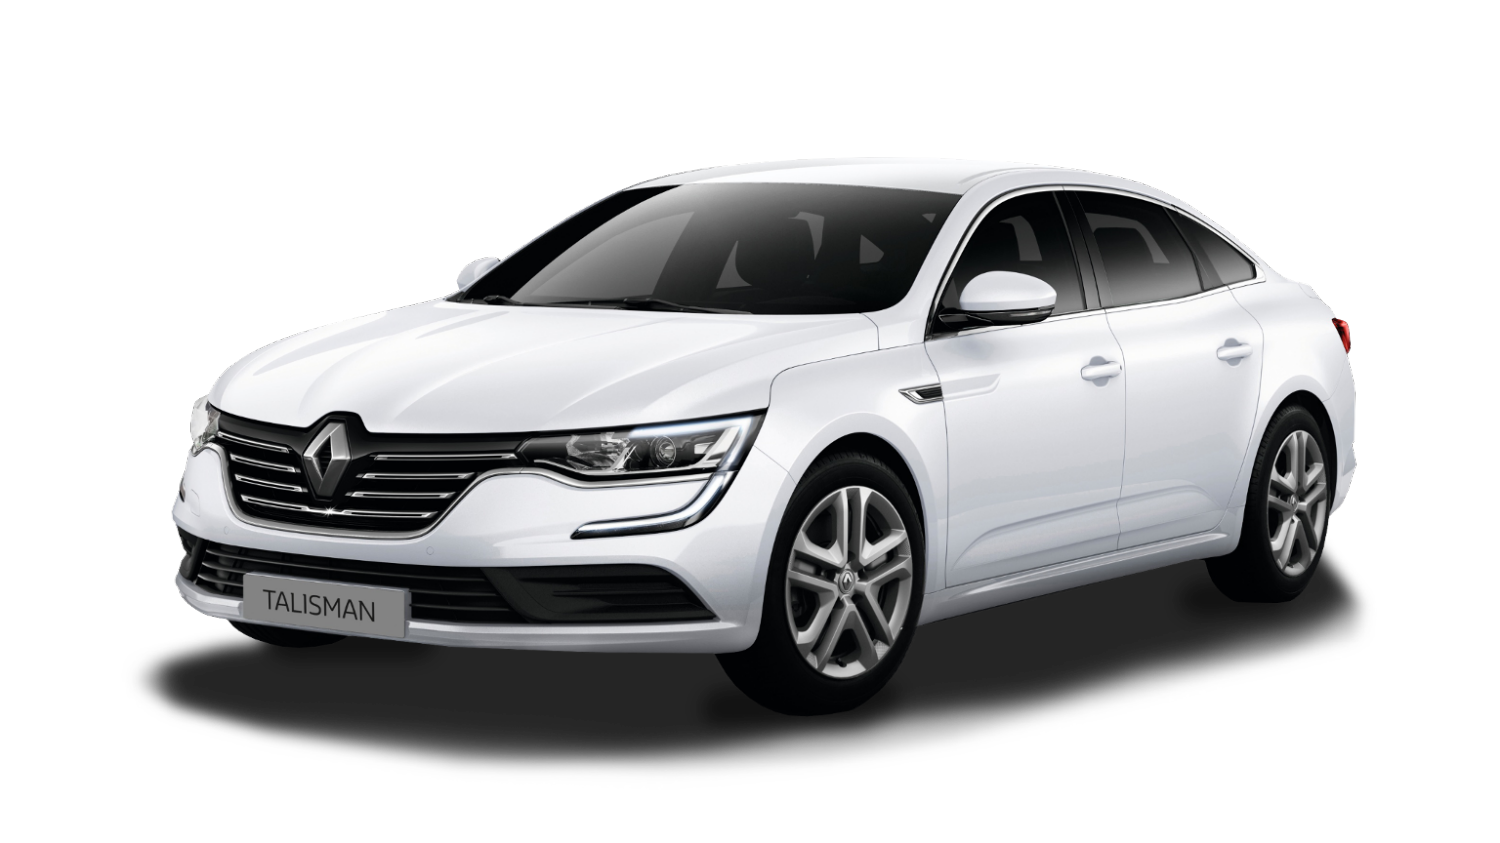 High Quality Tuning Files Renault Talisman 1.6 TCe 200hp